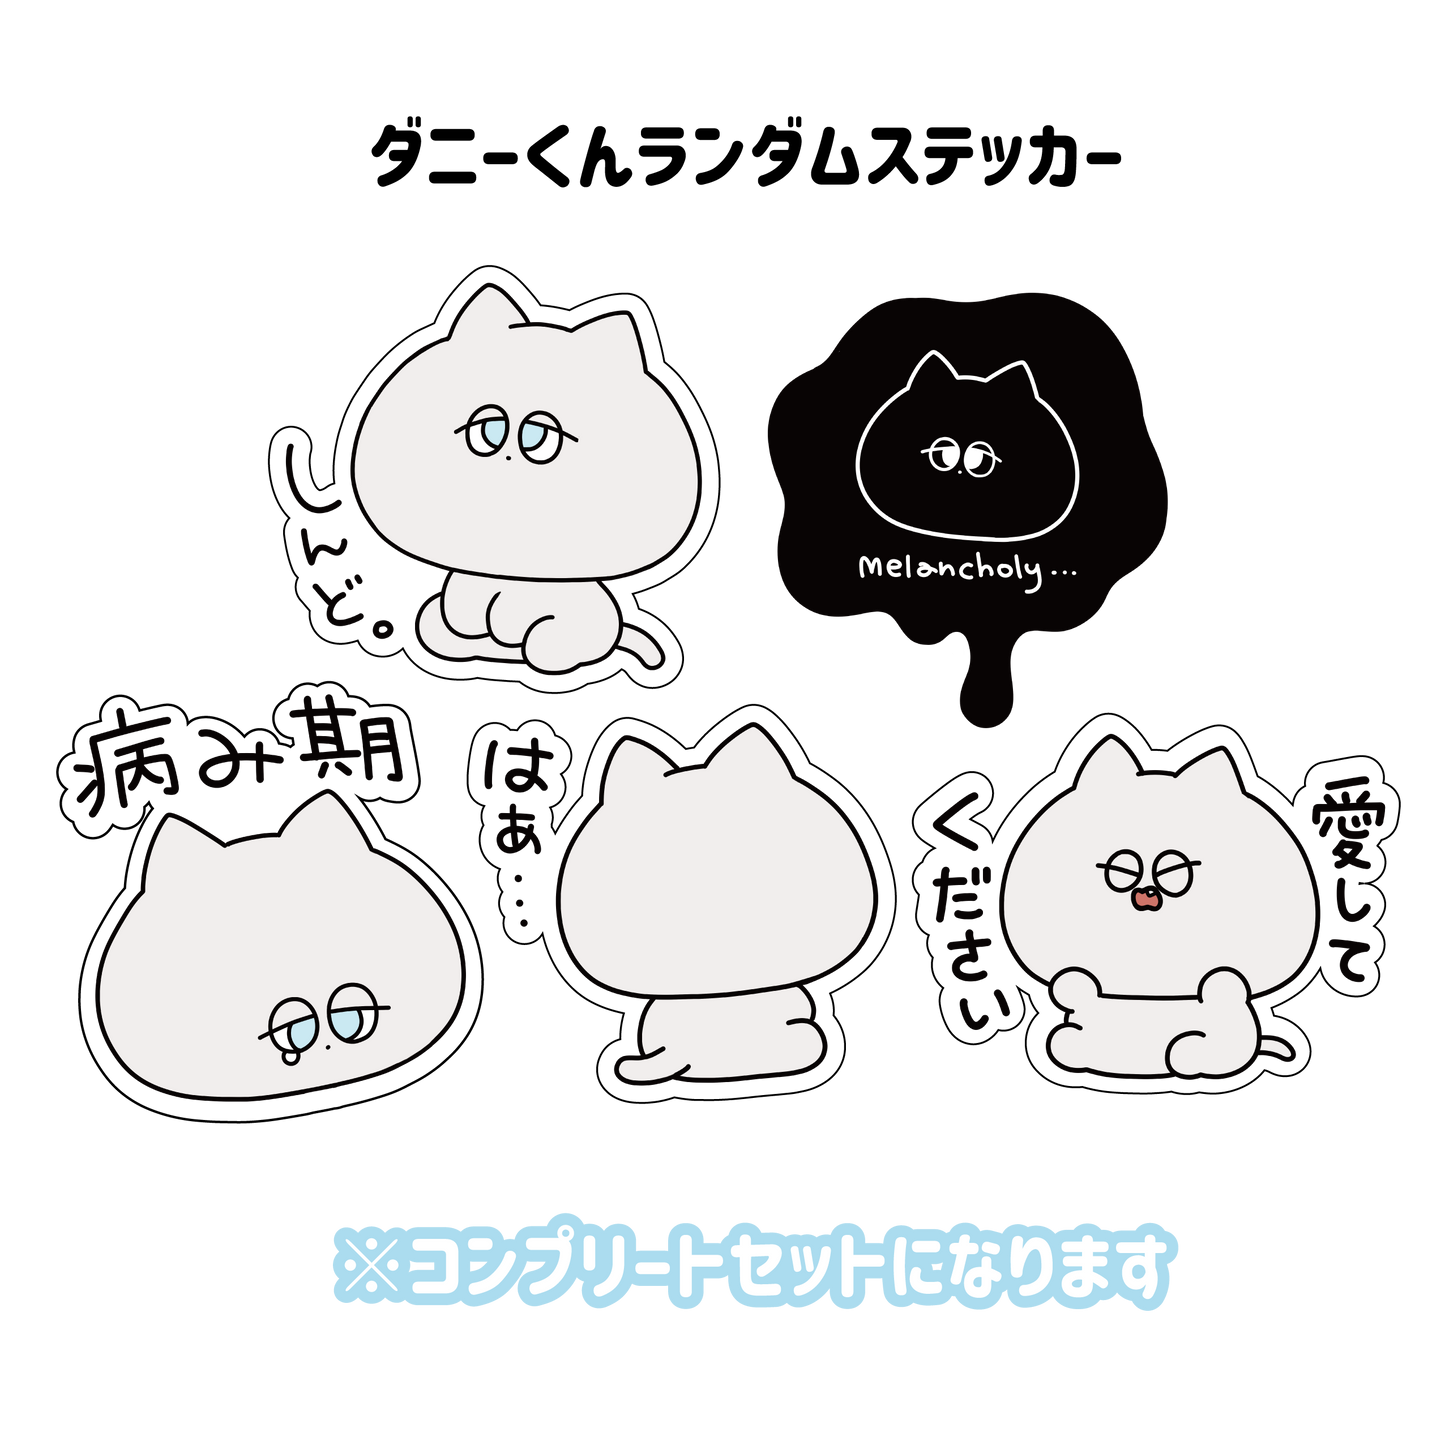 [Asamimi-chan] Danny-kun random sticker complete set (5 types in total) [Made-to-order]